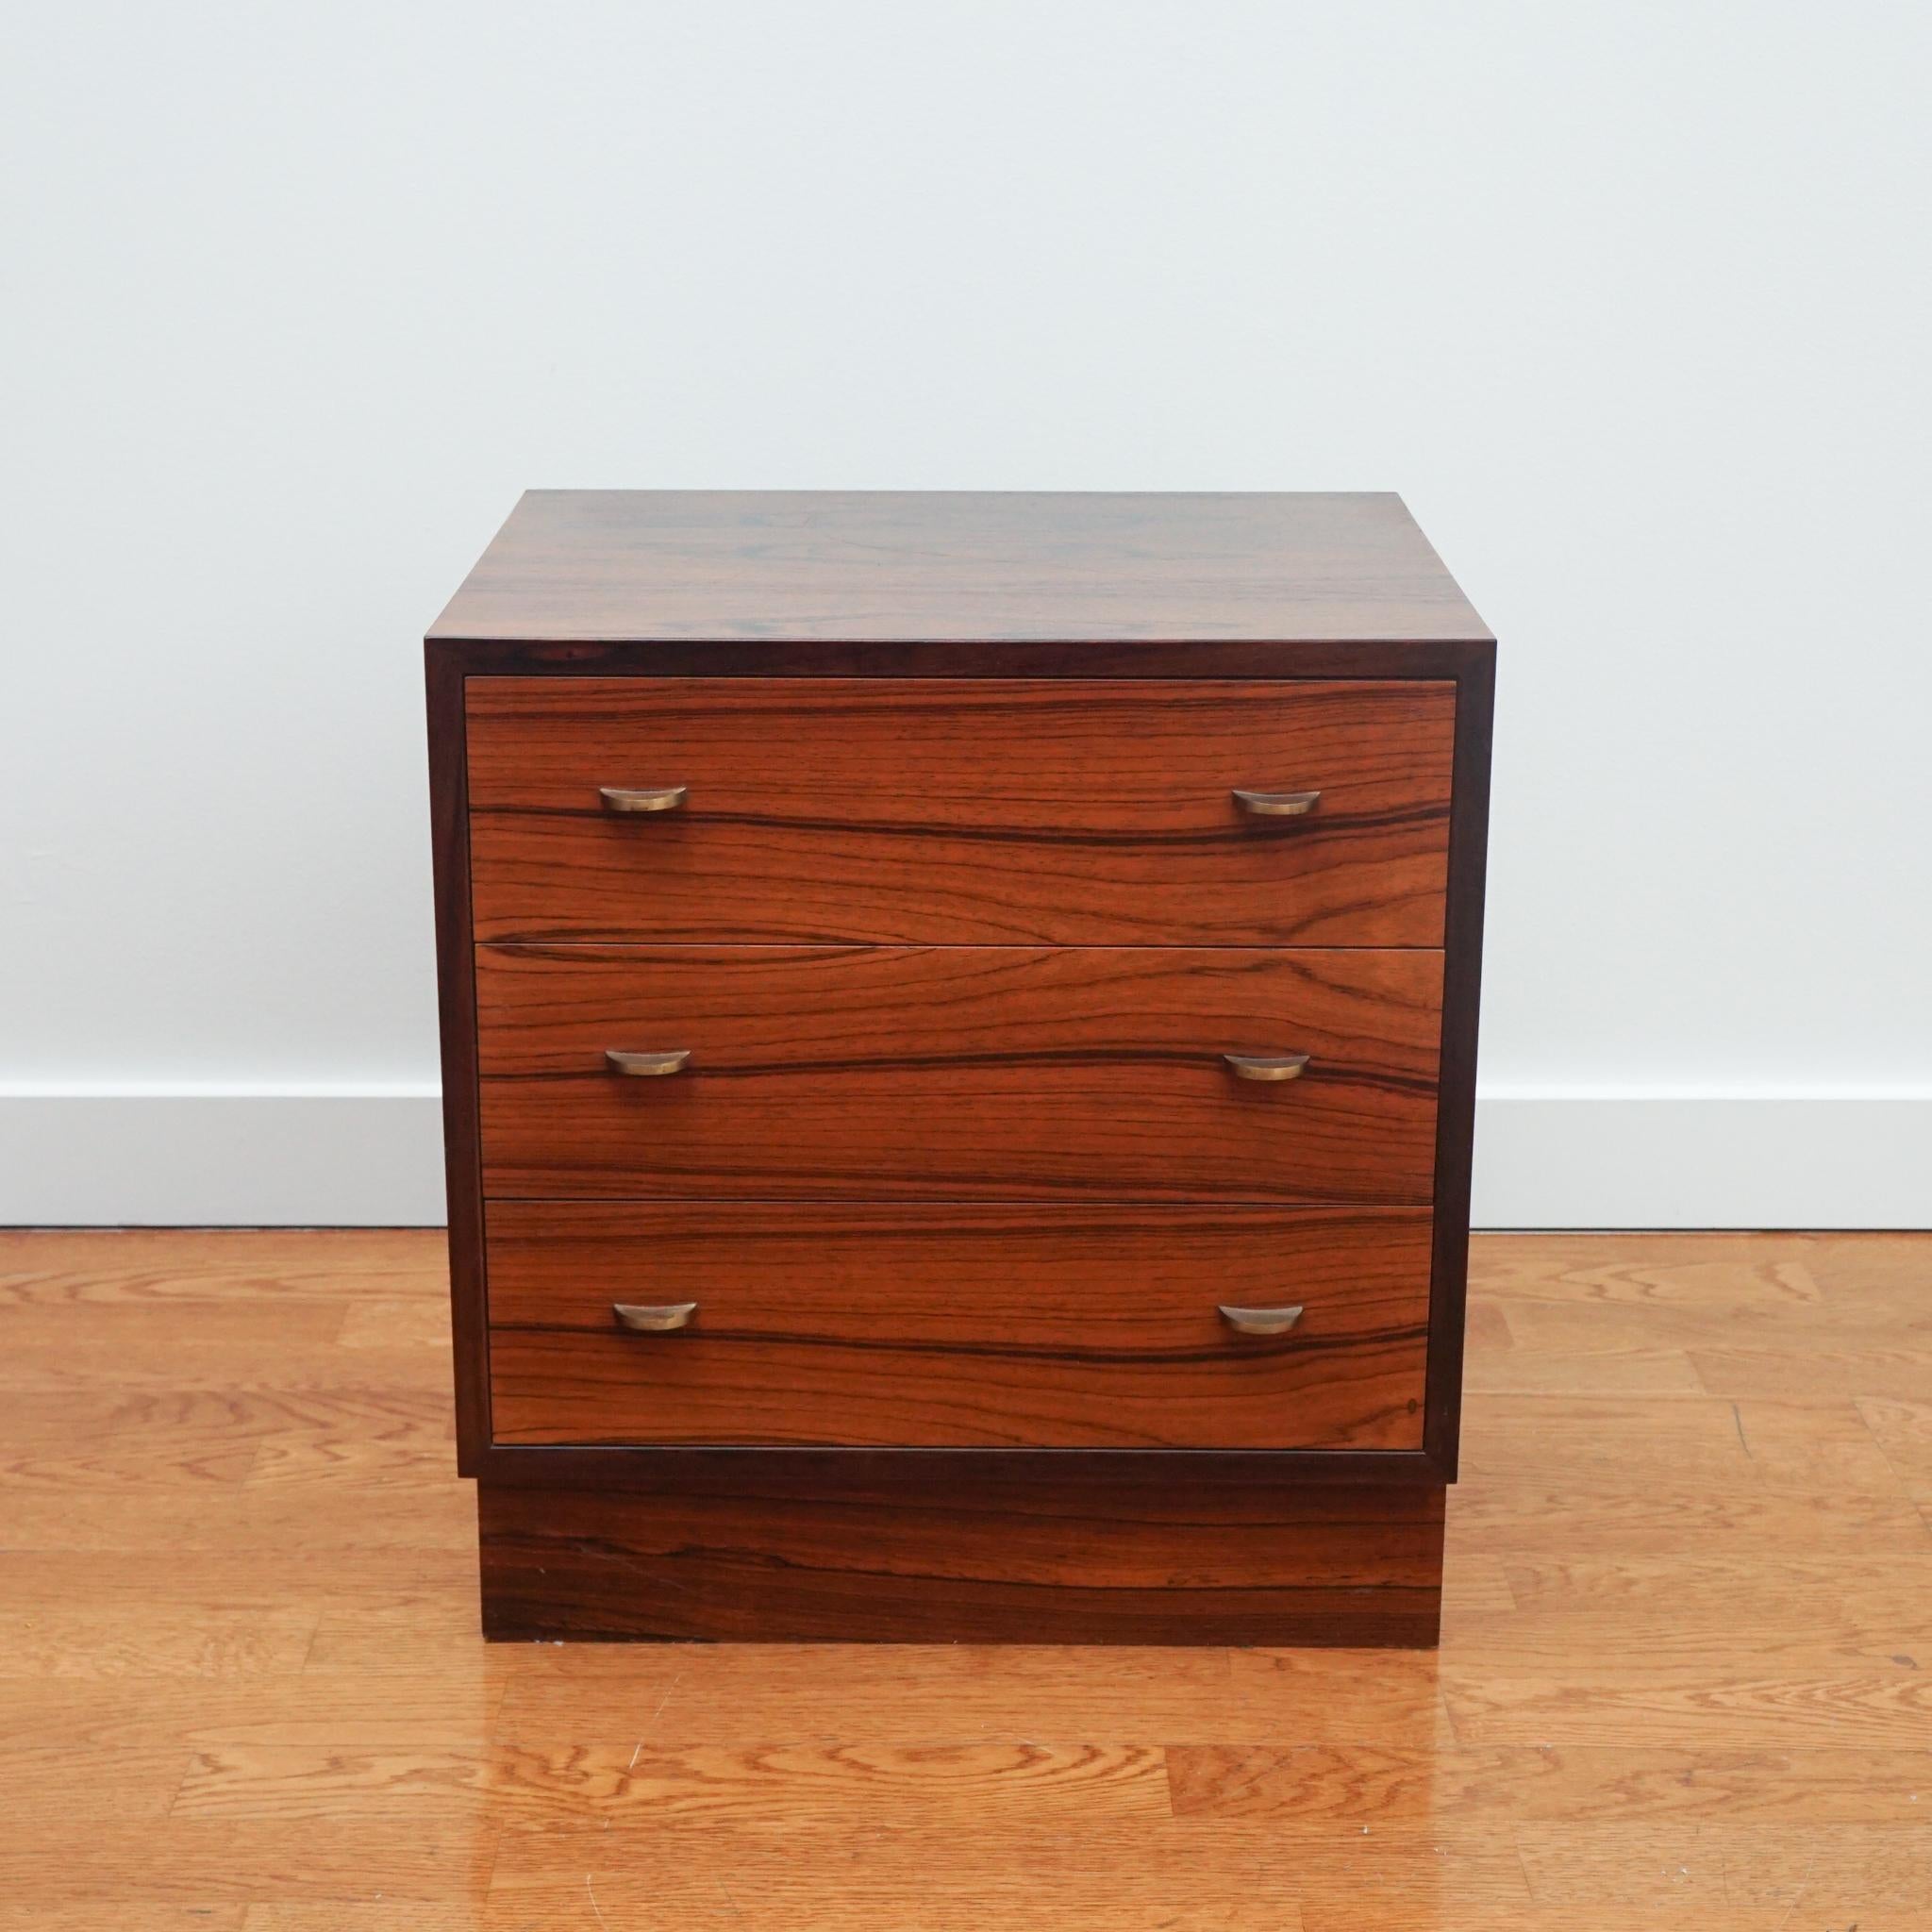 The handsome three-drawer chest of drawers, shown here, was designed by Torbjørn Afdal for Bruksbo in 1950s. Made of rosewood, each drawer is distinguished by dove-tail joinery and carved wood glides. Flat, half-moon shaped brass pulls complement